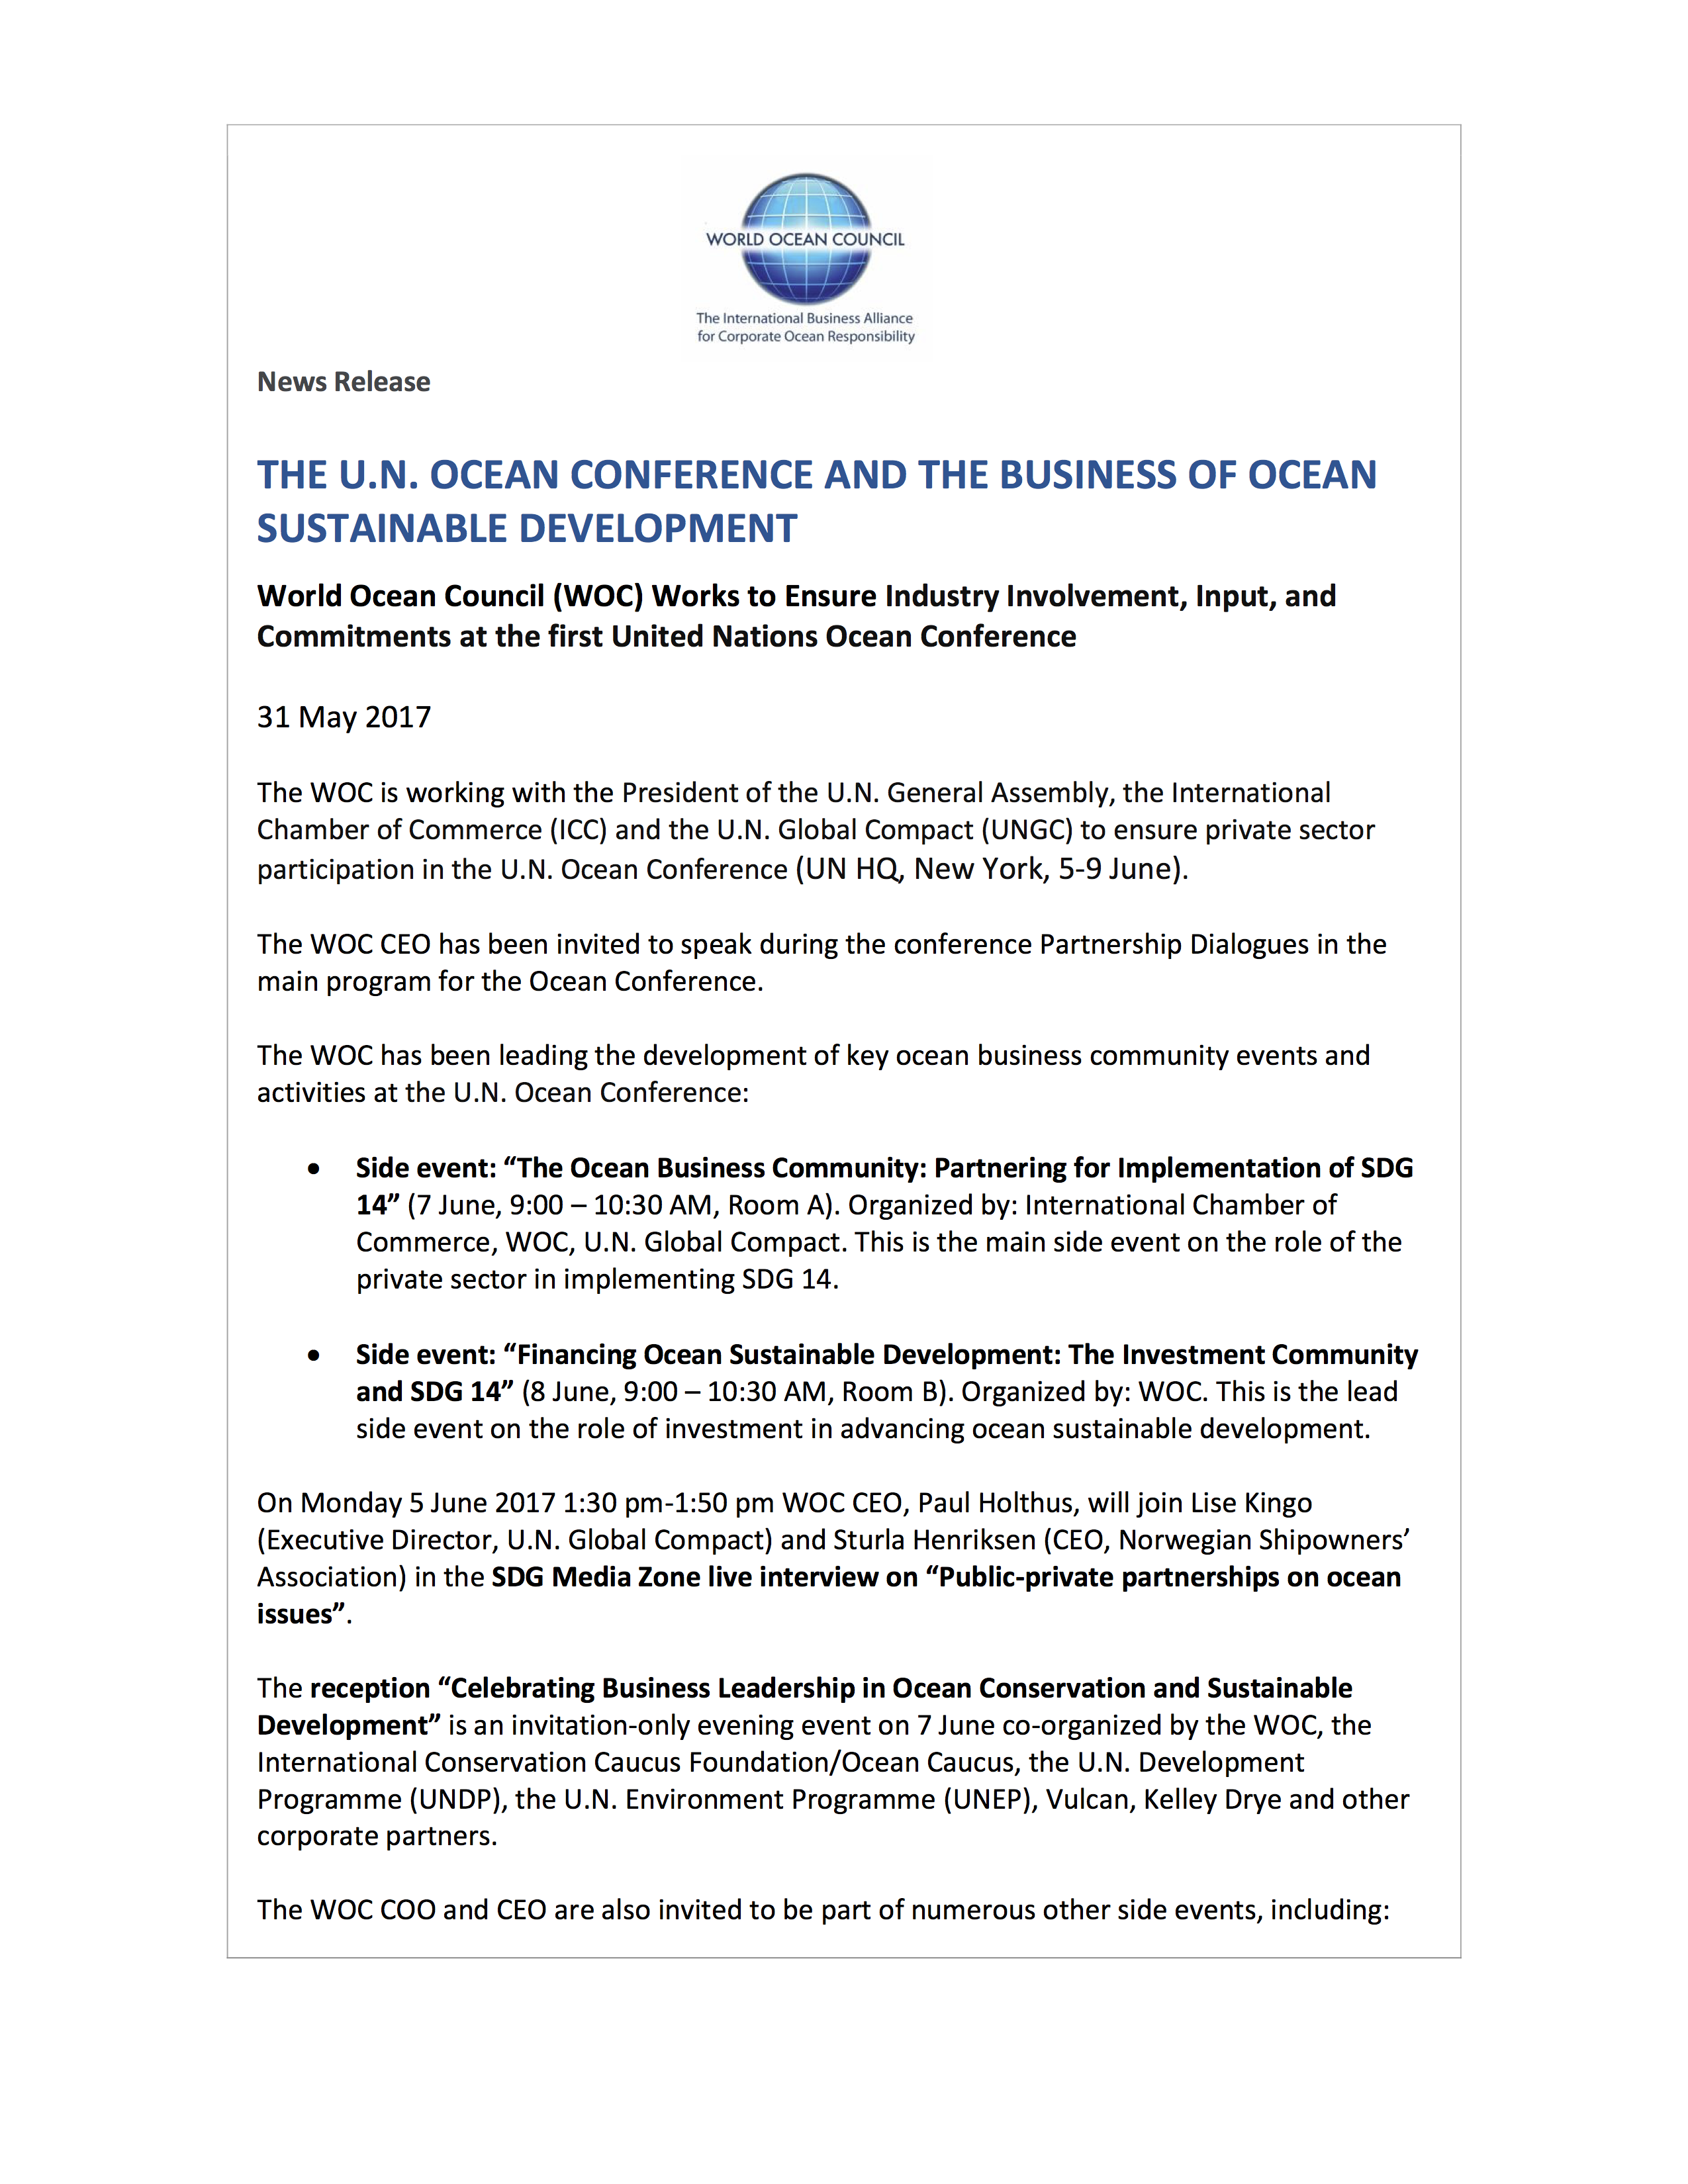 WOC News Release U.N. Ocean Conference and Business of Ocean Sustainable Development